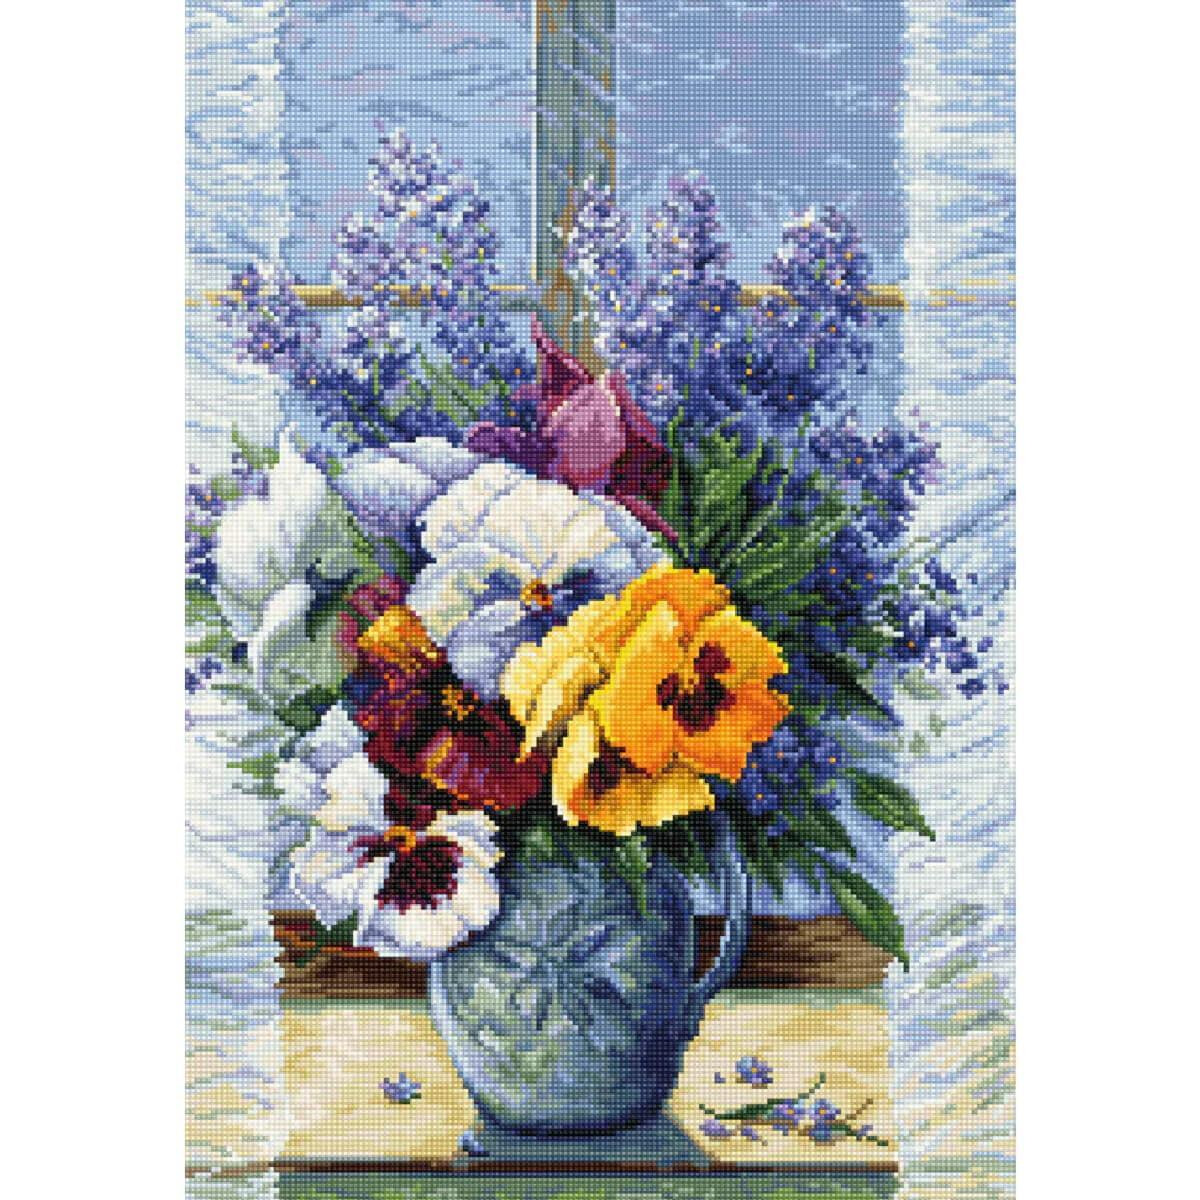 Luca-S counted cross stitch kit "Bouquet with...